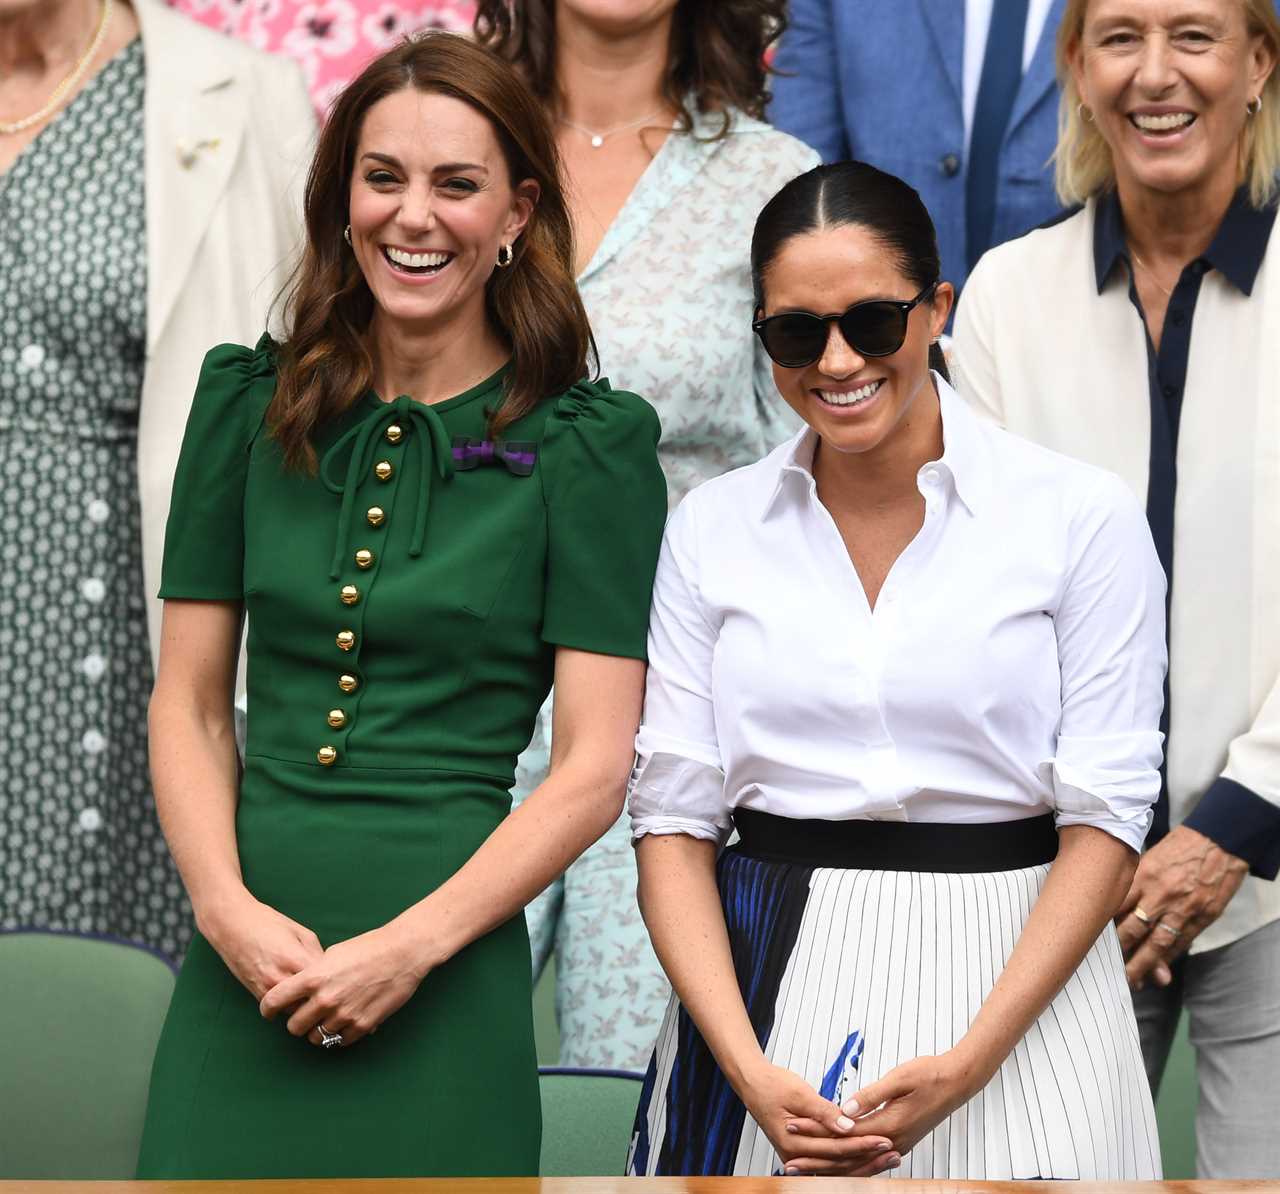 Meghan Markle and Kate Middleton have ‘blind ambition’ in common – but a key trait makes them clash, expert reveals